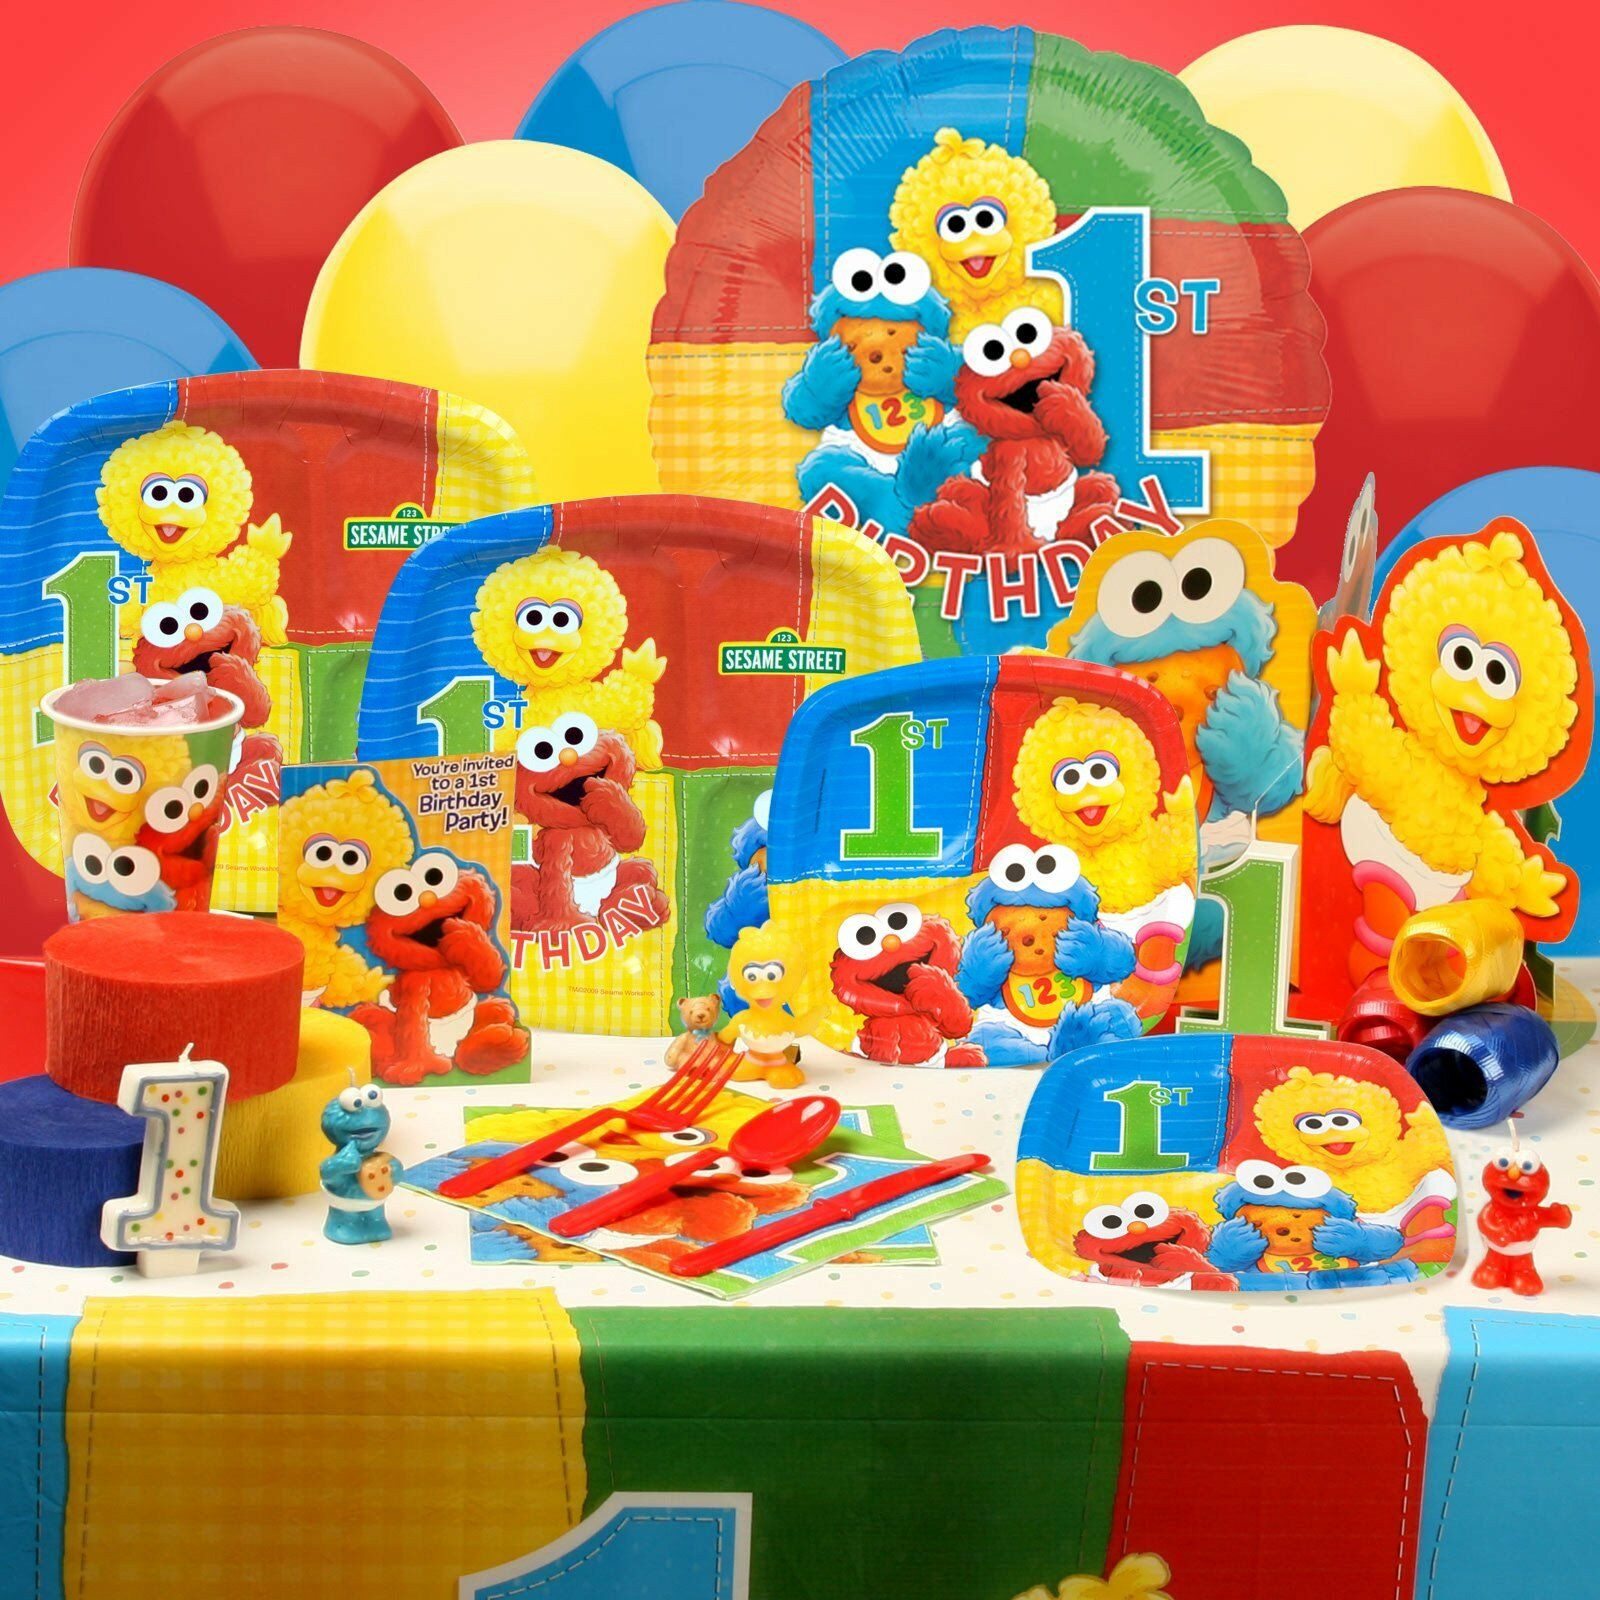 Sesame Street 1st Birthday Party Supplies
 Party decorations deals on 1001 Blocks